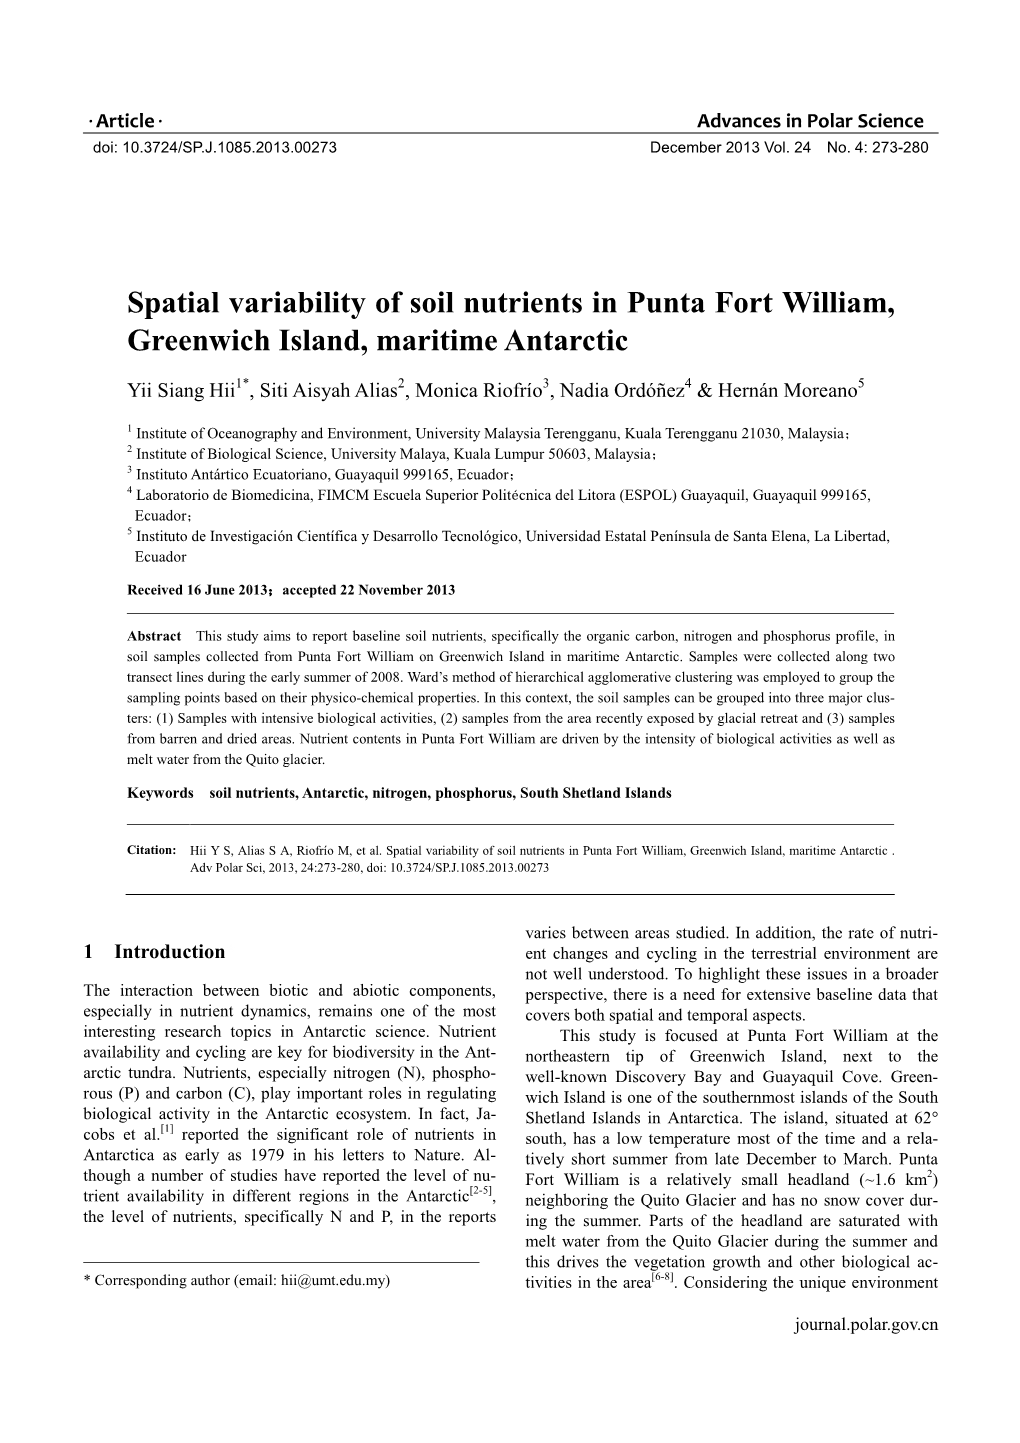 Spatial Variability of Soil Nutrients in Punta Fort William, Greenwich Island, Maritime Antarctic